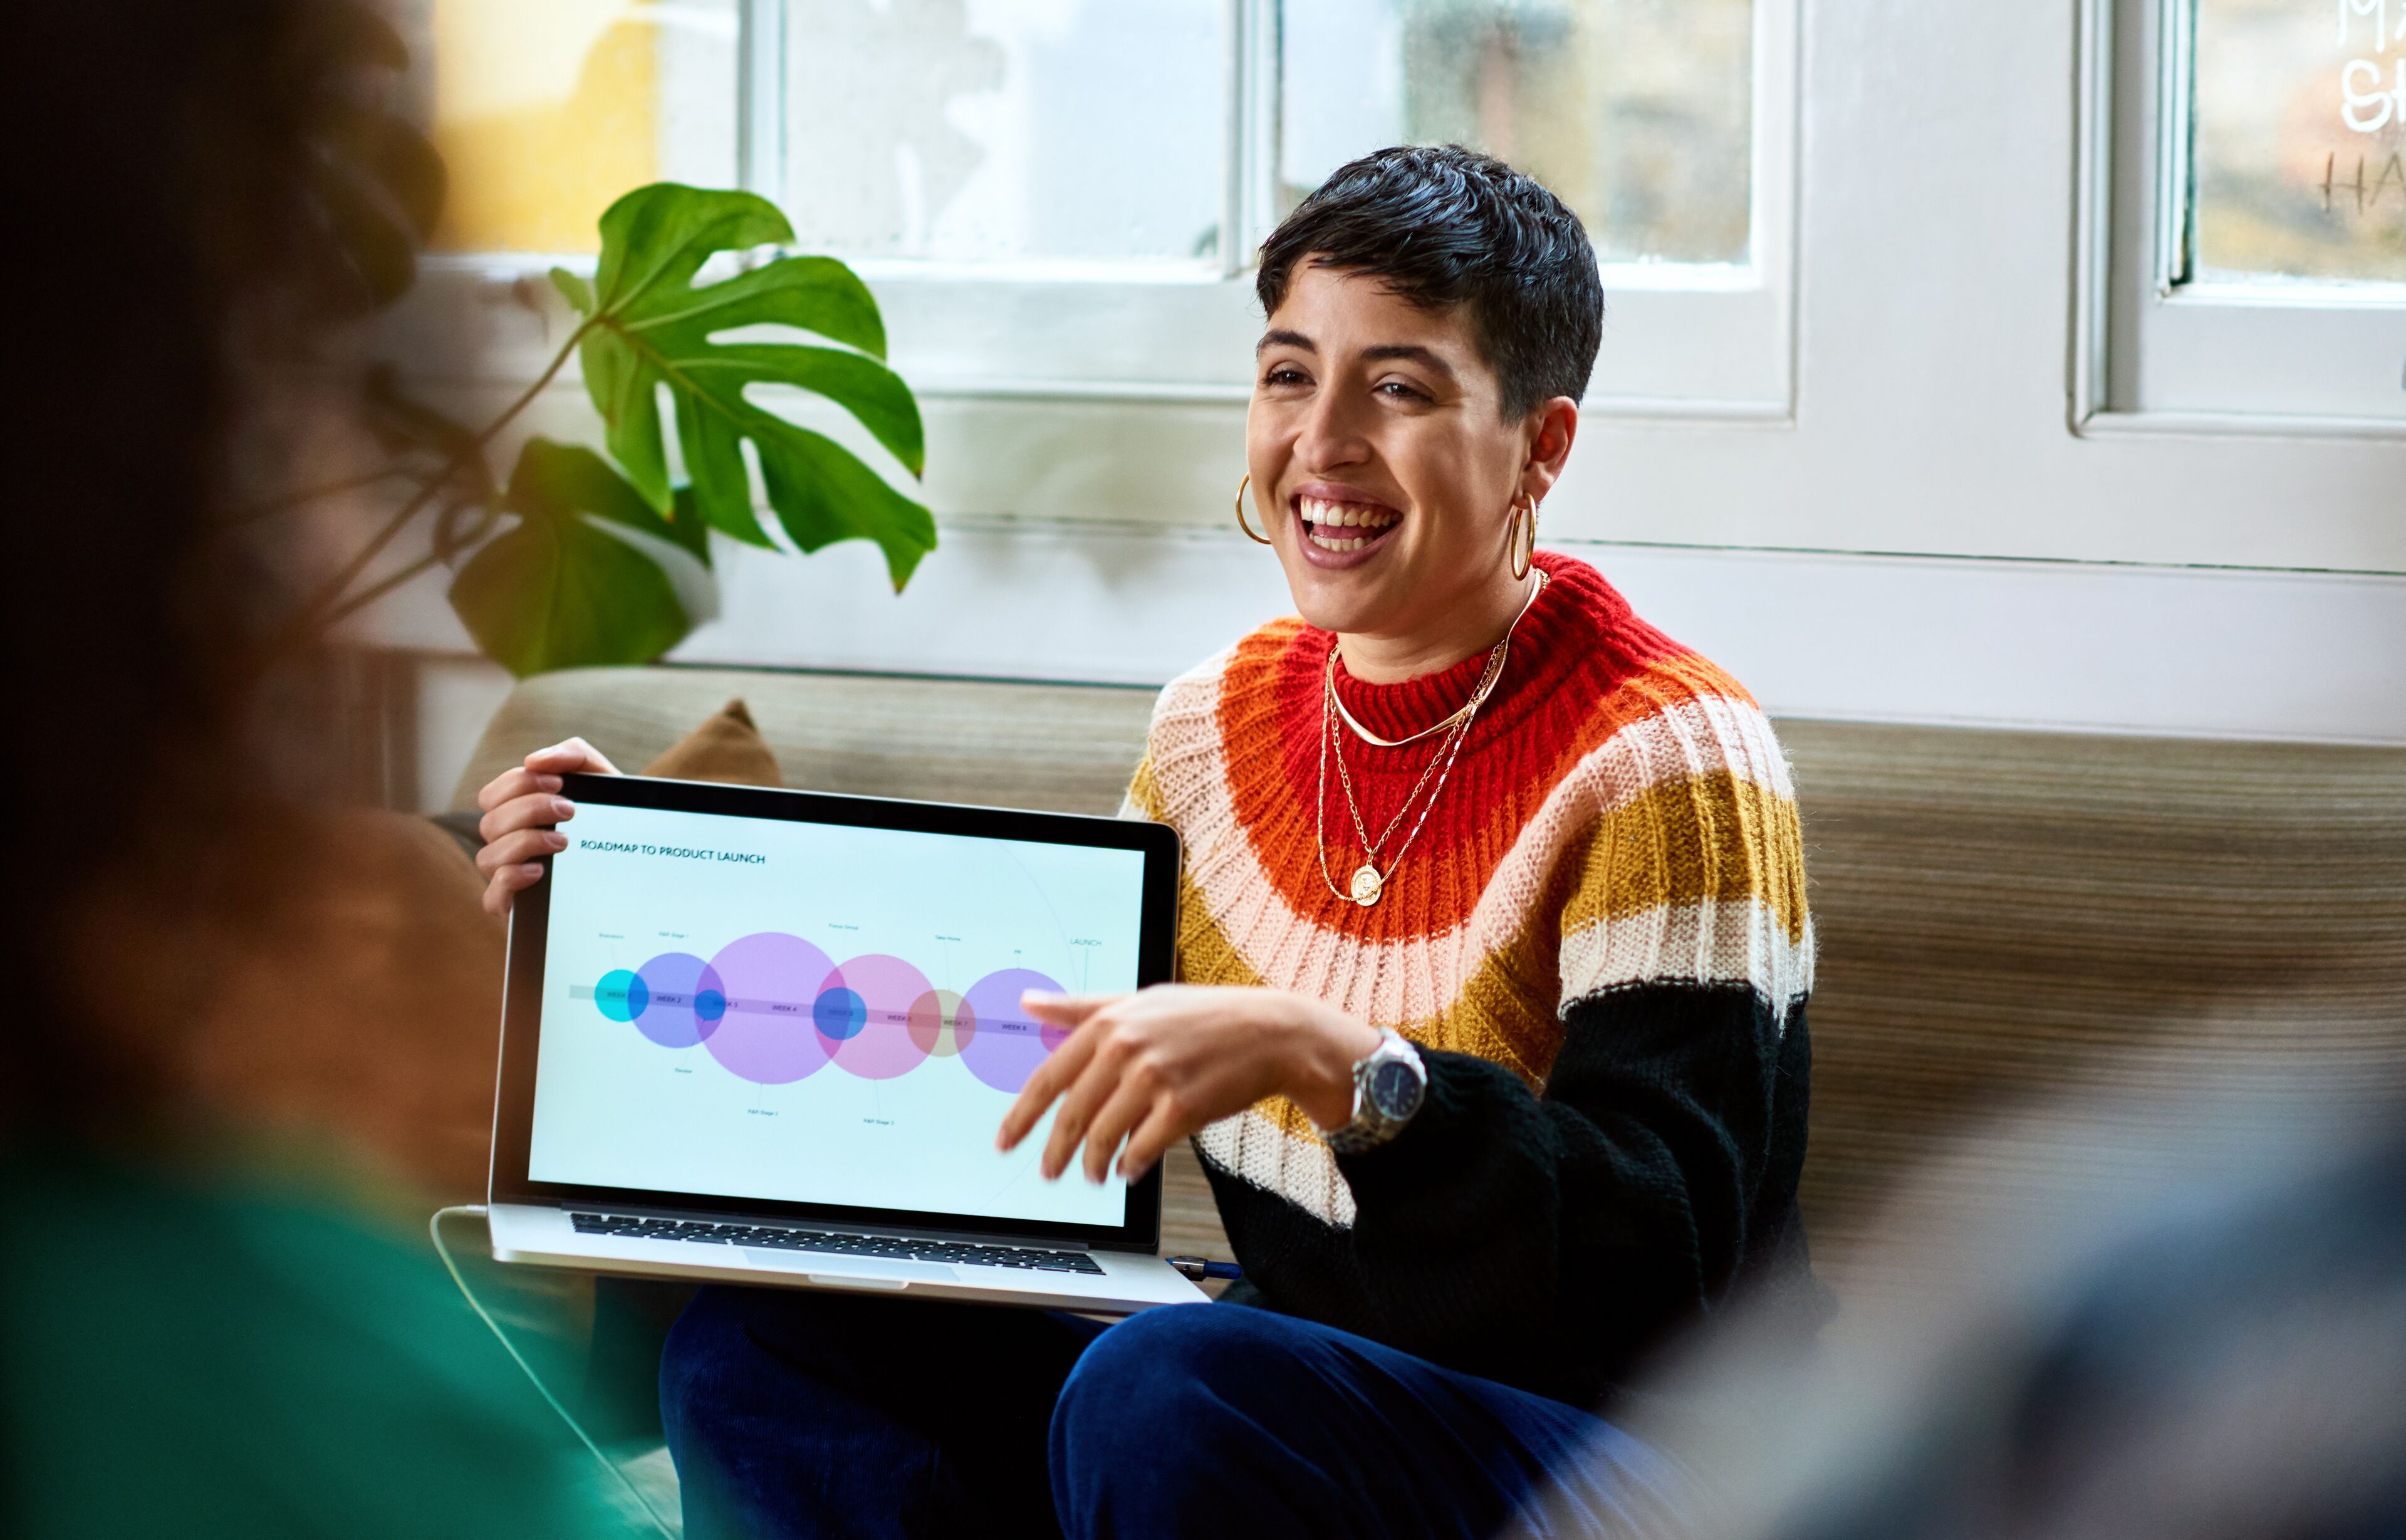 Smiling professional presenting a colorful business roadmap on a laptop to an unseen colleague.